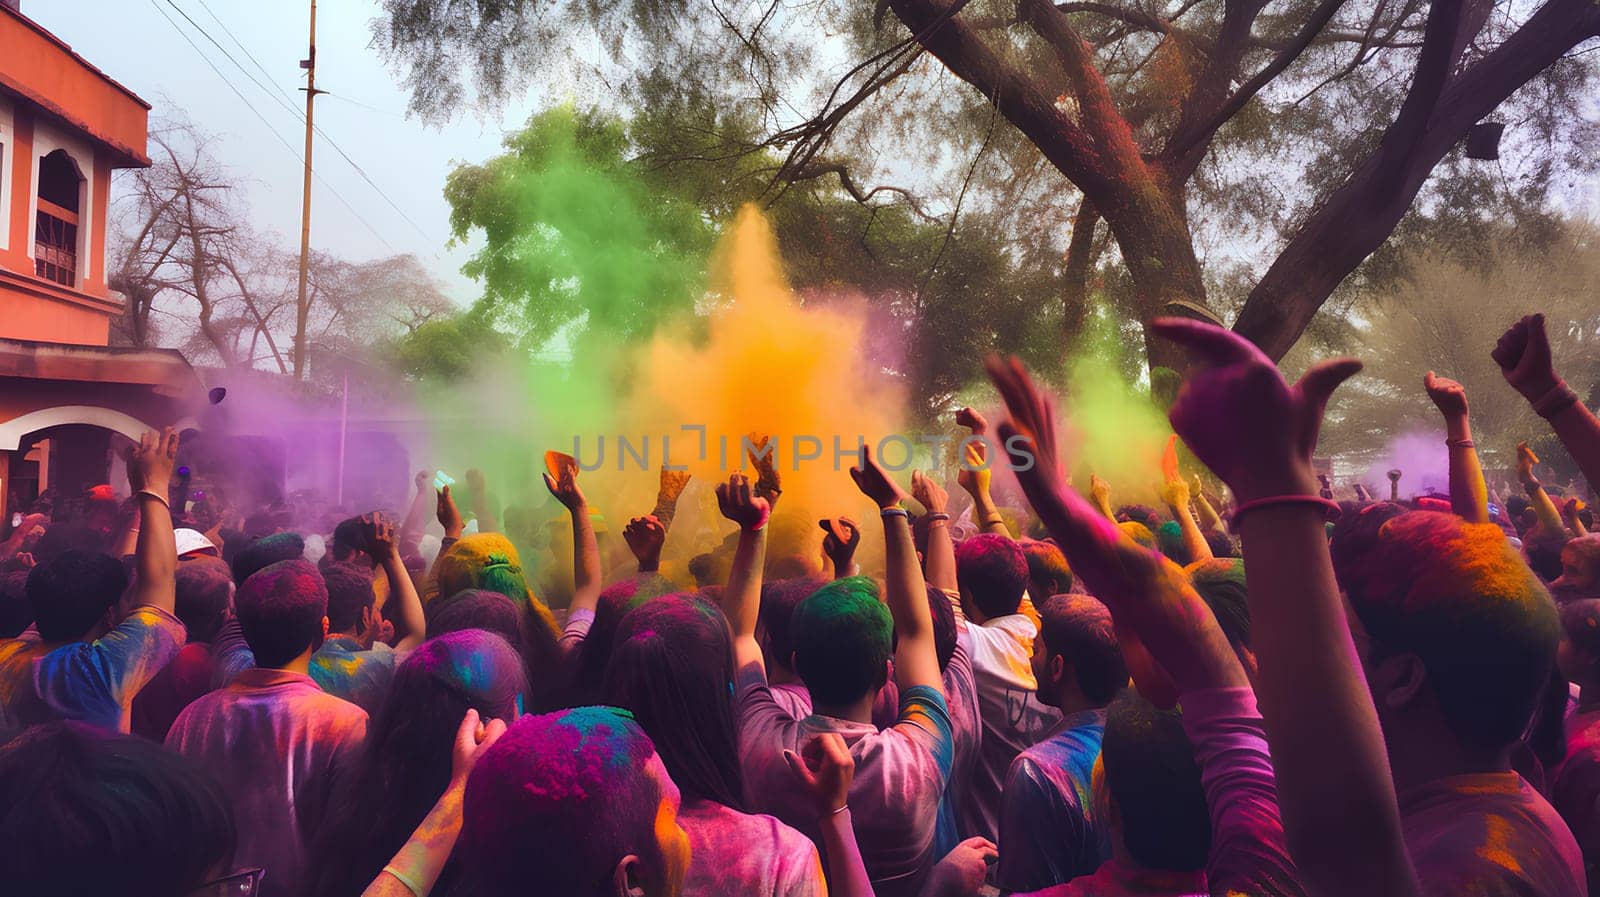 People celebrating the Holi festival of colors by Anny_Sketches